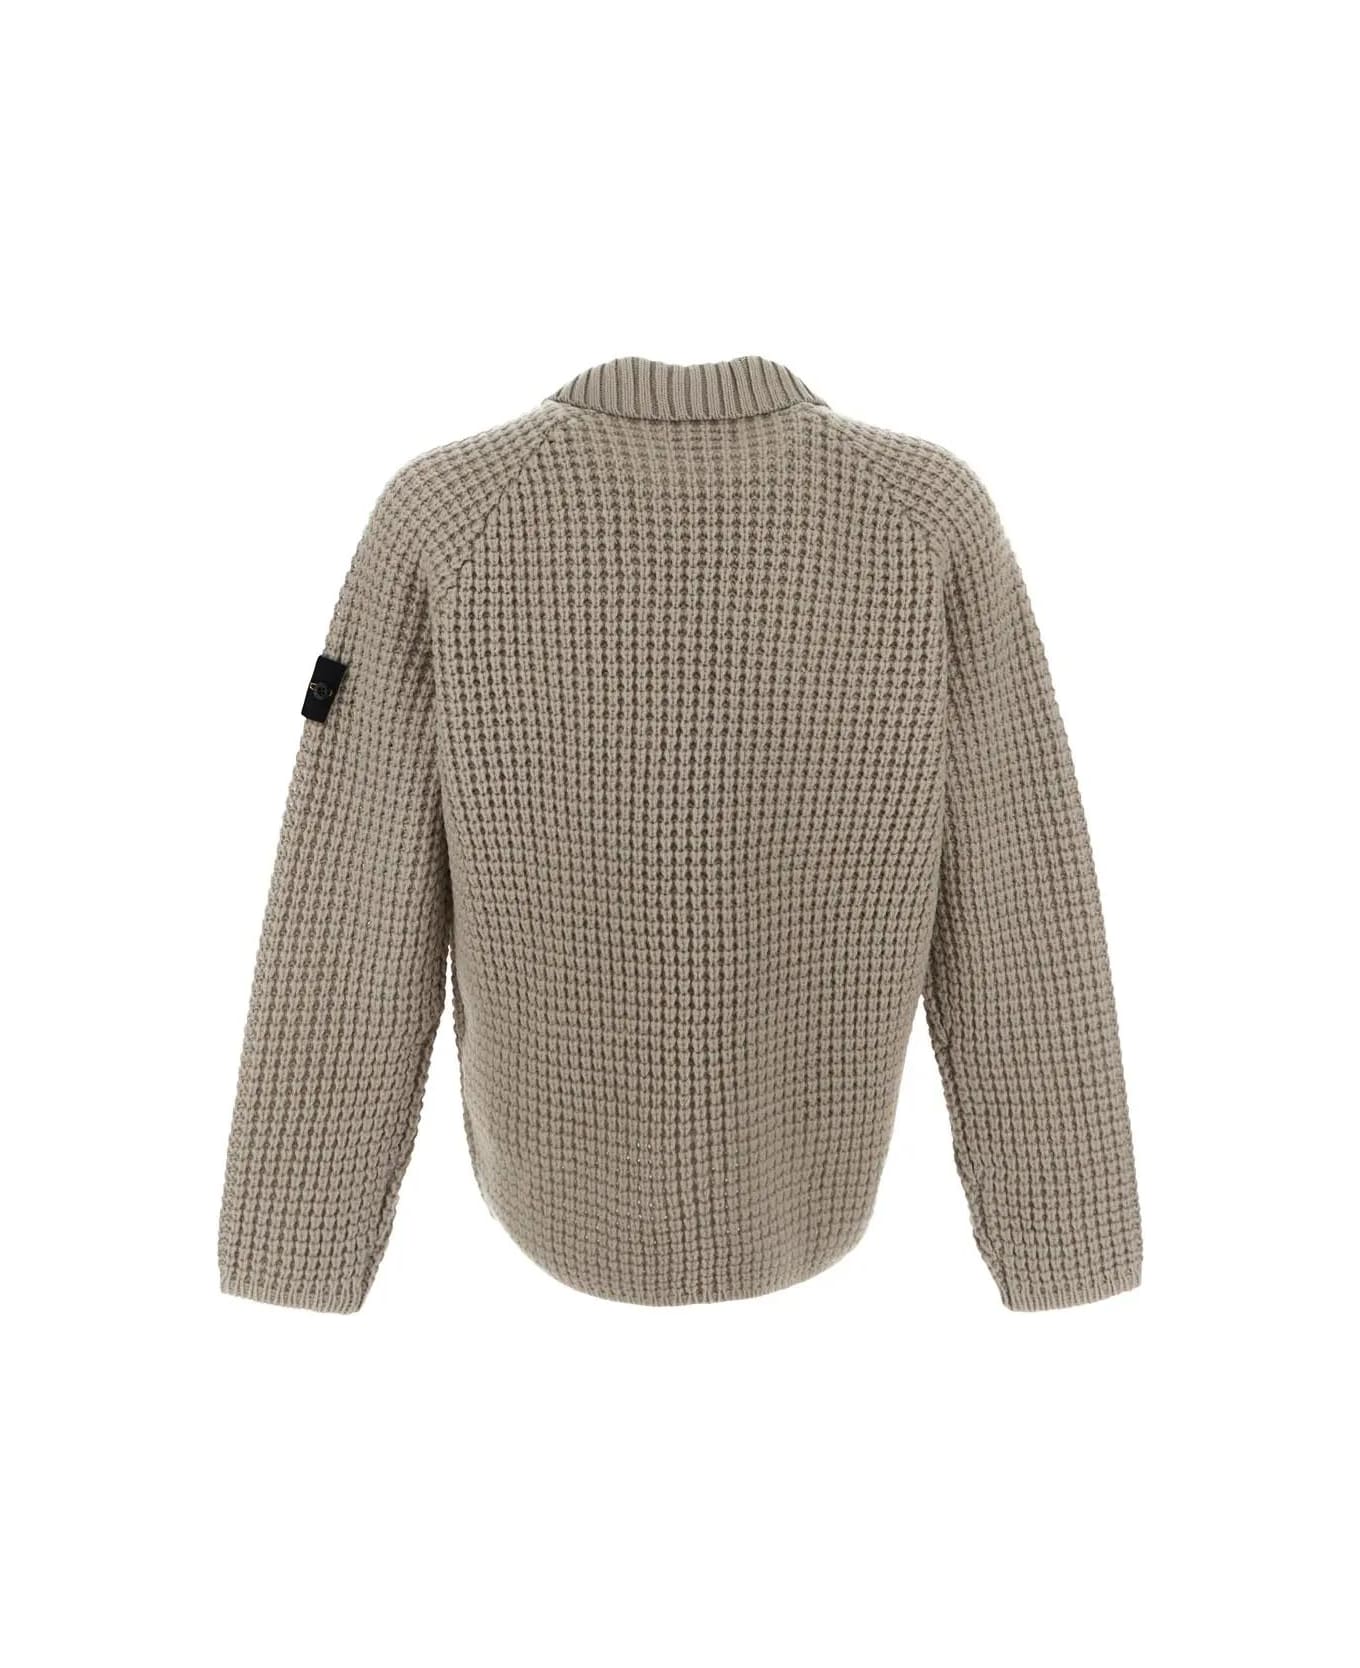 Stone Island Compass Patch Collared Jumper - BEIGE ニットウェア